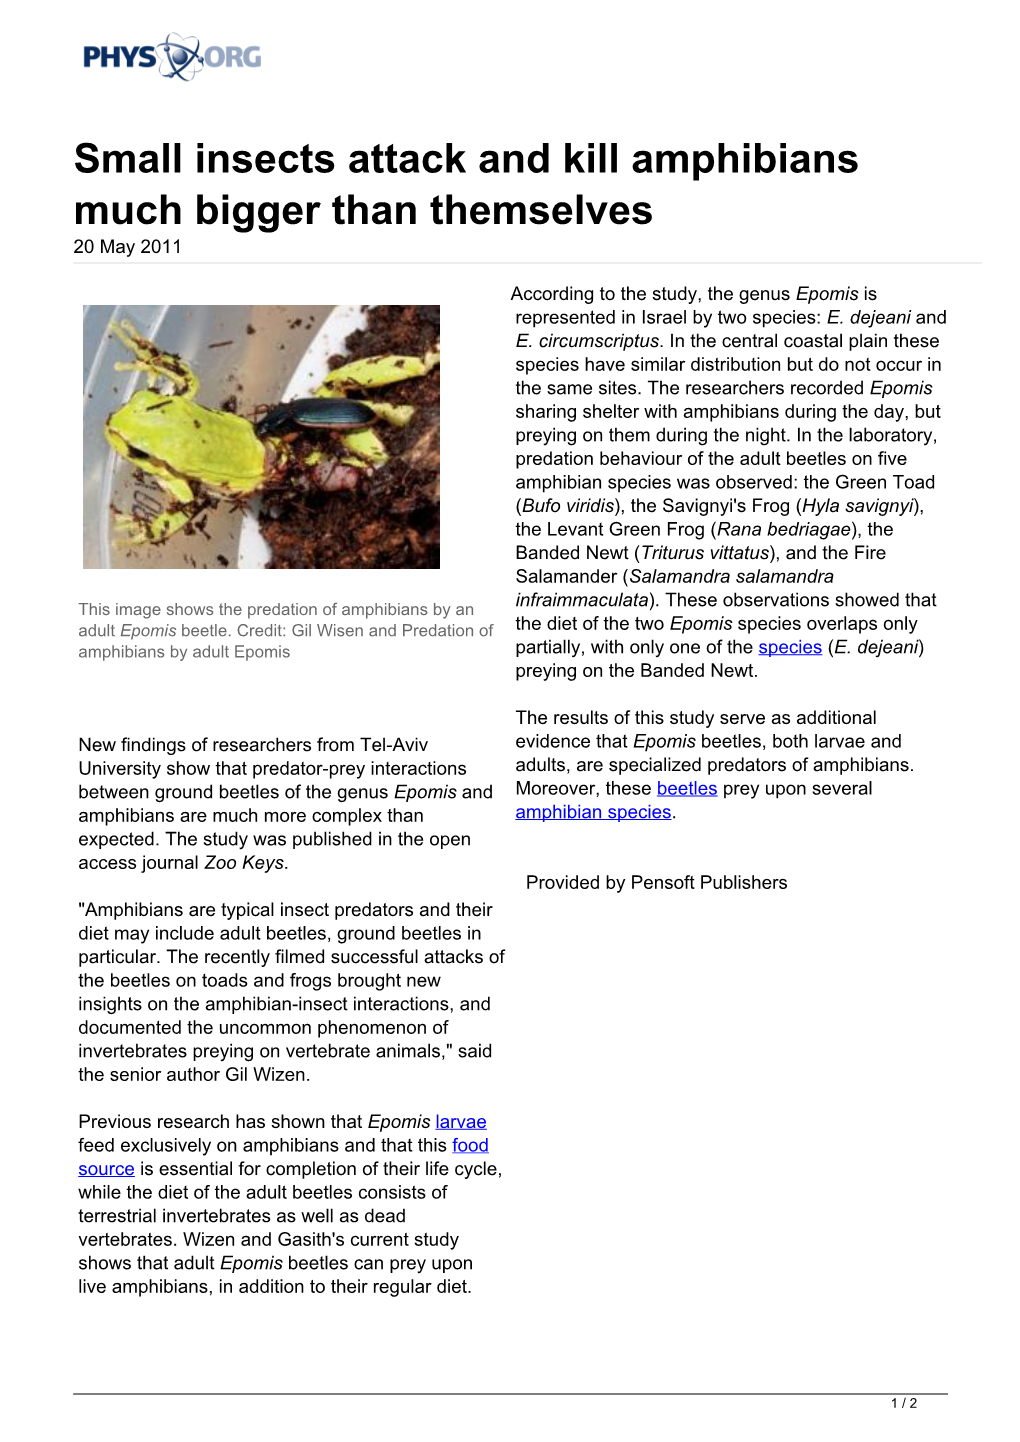 Small Insects Attack and Kill Amphibians Much Bigger Than Themselves 20 May 2011